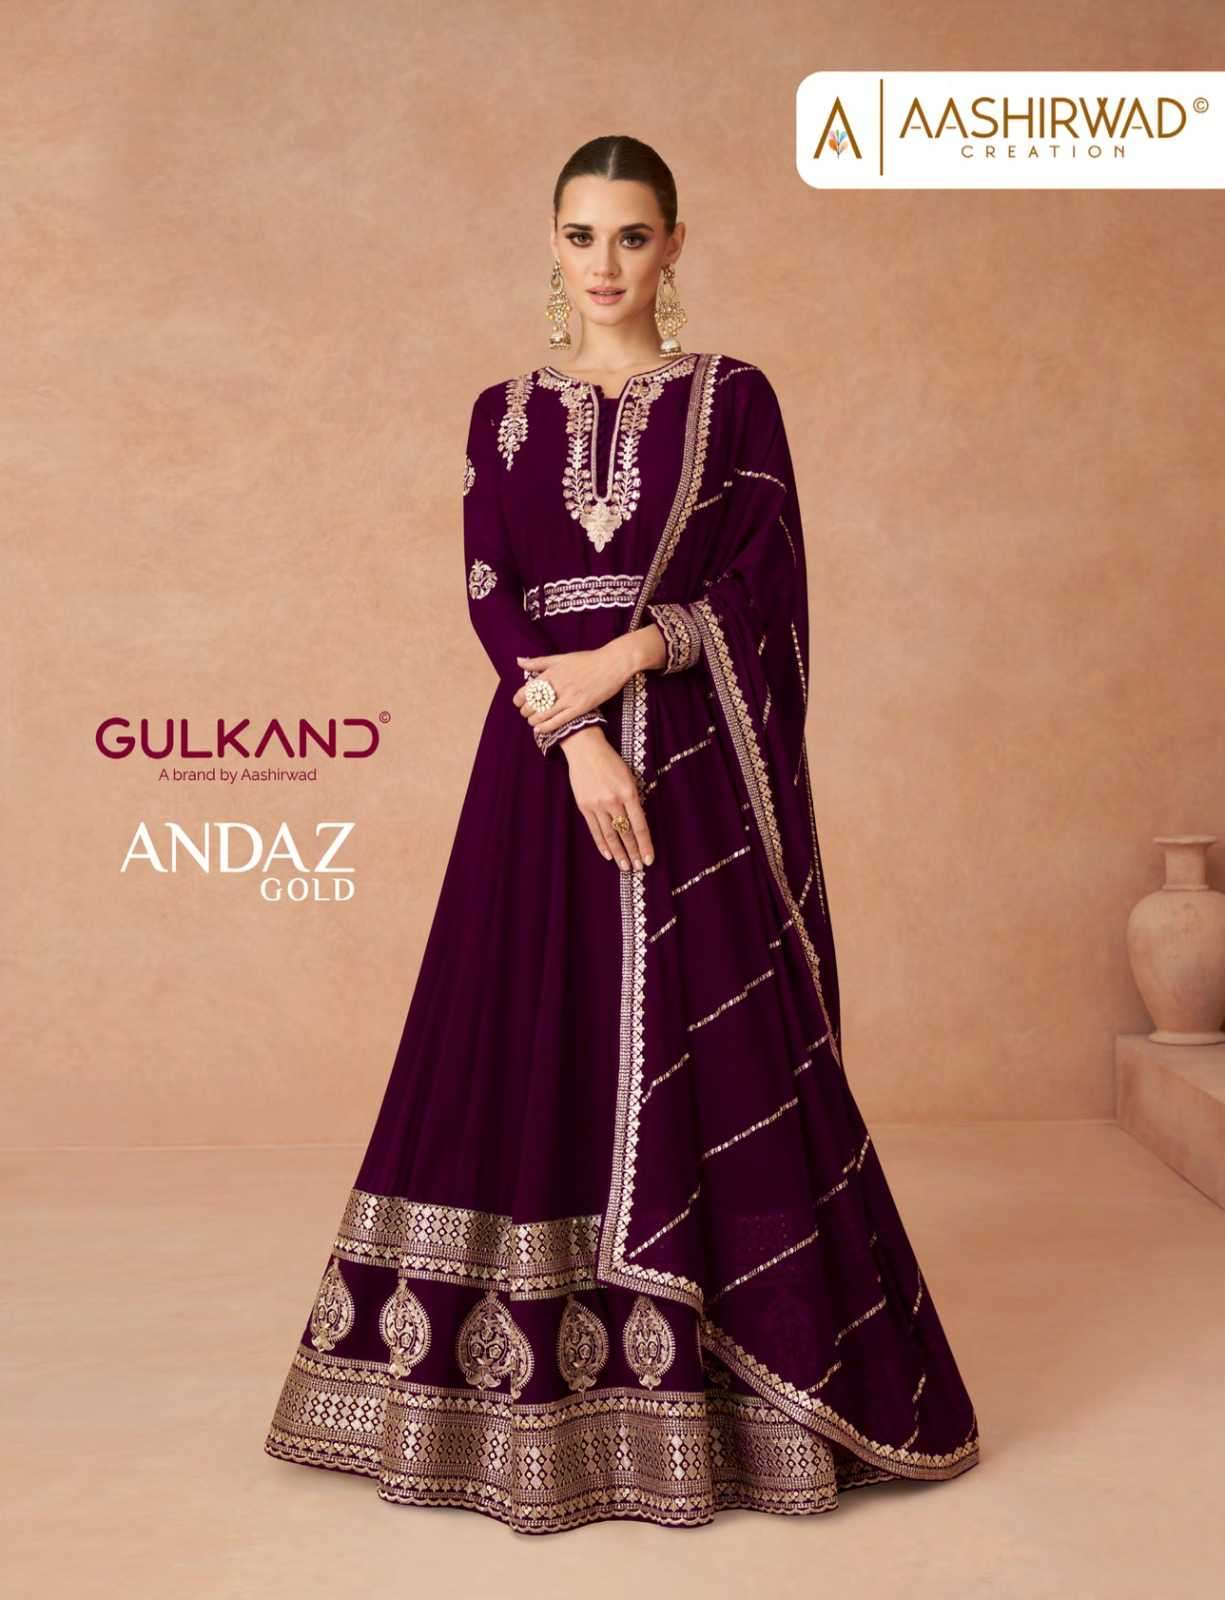 aashirwad gulkand andaz gold series 9875-9878 real georgette suit 